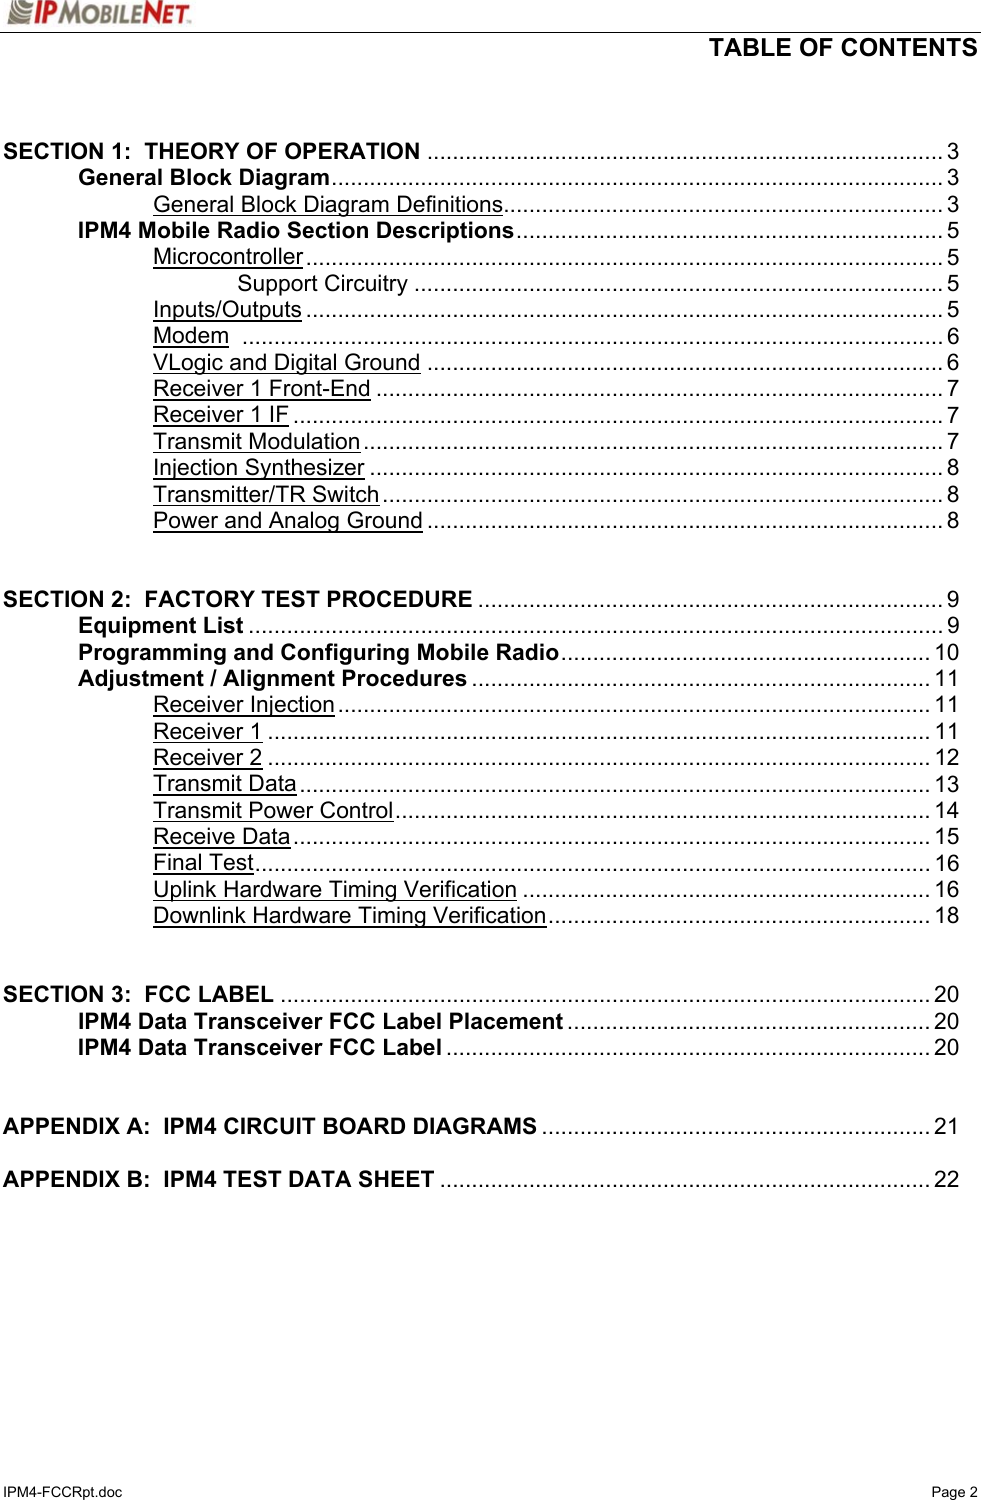   TABLE OF CONTENTS  IPM4-FCCRpt.doc   Page 2   SECTION 1:  THEORY OF OPERATION ................................................................................. 3   General Block Diagram................................................................................................ 3     General Block Diagram Definitions..................................................................... 3  IPM4 Mobile Radio Section Descriptions................................................................... 5   Microcontroller.................................................................................................... 5     Support Circuitry ................................................................................... 5   Inputs/Outputs .................................................................................................... 5   Modem .............................................................................................................. 6   VLogic and Digital Ground ................................................................................. 6   Receiver 1 Front-End ......................................................................................... 7   Receiver 1 IF ...................................................................................................... 7   Transmit Modulation........................................................................................... 7   Injection Synthesizer .......................................................................................... 8   Transmitter/TR Switch........................................................................................ 8     Power and Analog Ground ................................................................................. 8   SECTION 2:  FACTORY TEST PROCEDURE ......................................................................... 9  Equipment List ............................................................................................................. 9   Programming and Configuring Mobile Radio.......................................................... 10   Adjustment / Alignment Procedures ........................................................................ 11   Receiver Injection............................................................................................. 11   Receiver 1........................................................................................................ 11   Receiver 2........................................................................................................ 12   Transmit Data................................................................................................... 13   Transmit Power Control.................................................................................... 14   Receive Data.................................................................................................... 15   Final Test.......................................................................................................... 16     Uplink Hardware Timing Verification ................................................................ 16     Downlink Hardware Timing Verification............................................................ 18   SECTION 3:  FCC LABEL ...................................................................................................... 20   IPM4 Data Transceiver FCC Label Placement ......................................................... 20  IPM4 Data Transceiver FCC Label ............................................................................ 20   APPENDIX A:  IPM4 CIRCUIT BOARD DIAGRAMS ............................................................. 21  APPENDIX B:  IPM4 TEST DATA SHEET ............................................................................. 22   